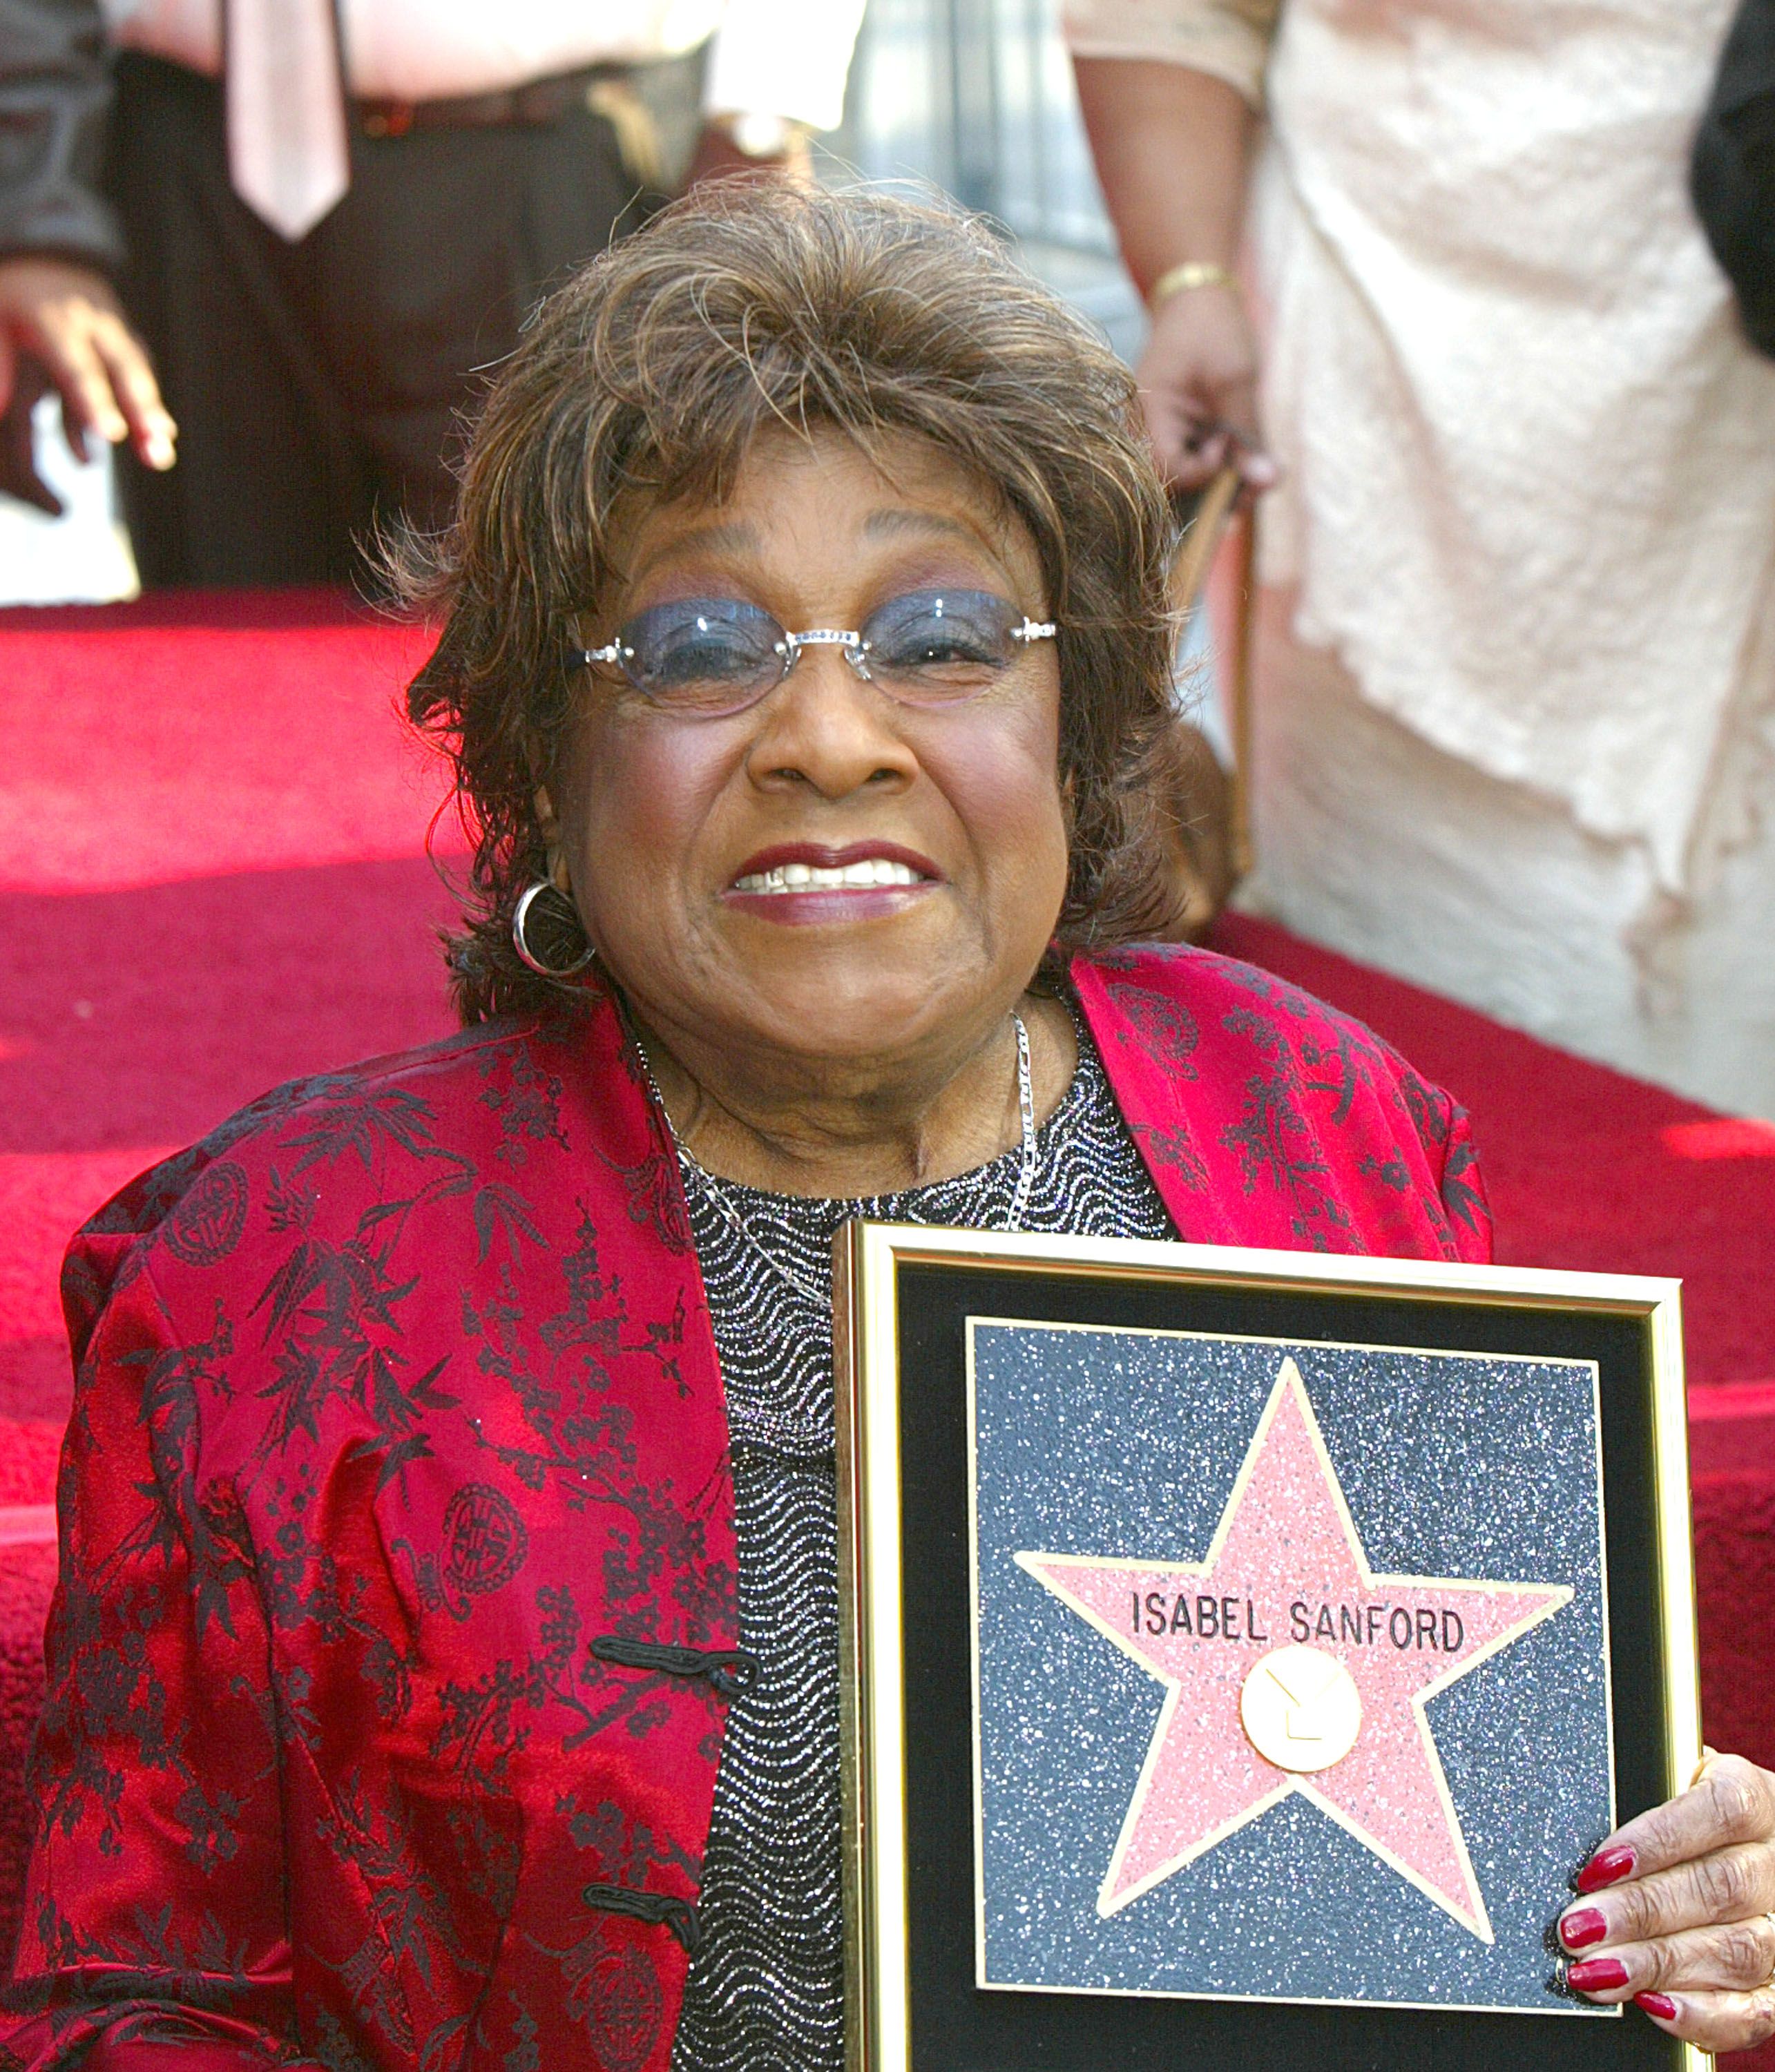 Isabel Sanford being honored with a star on the Hollywood Walk of Fame in Los Angeles, California | Photo: Kevin Winter/Getty Images